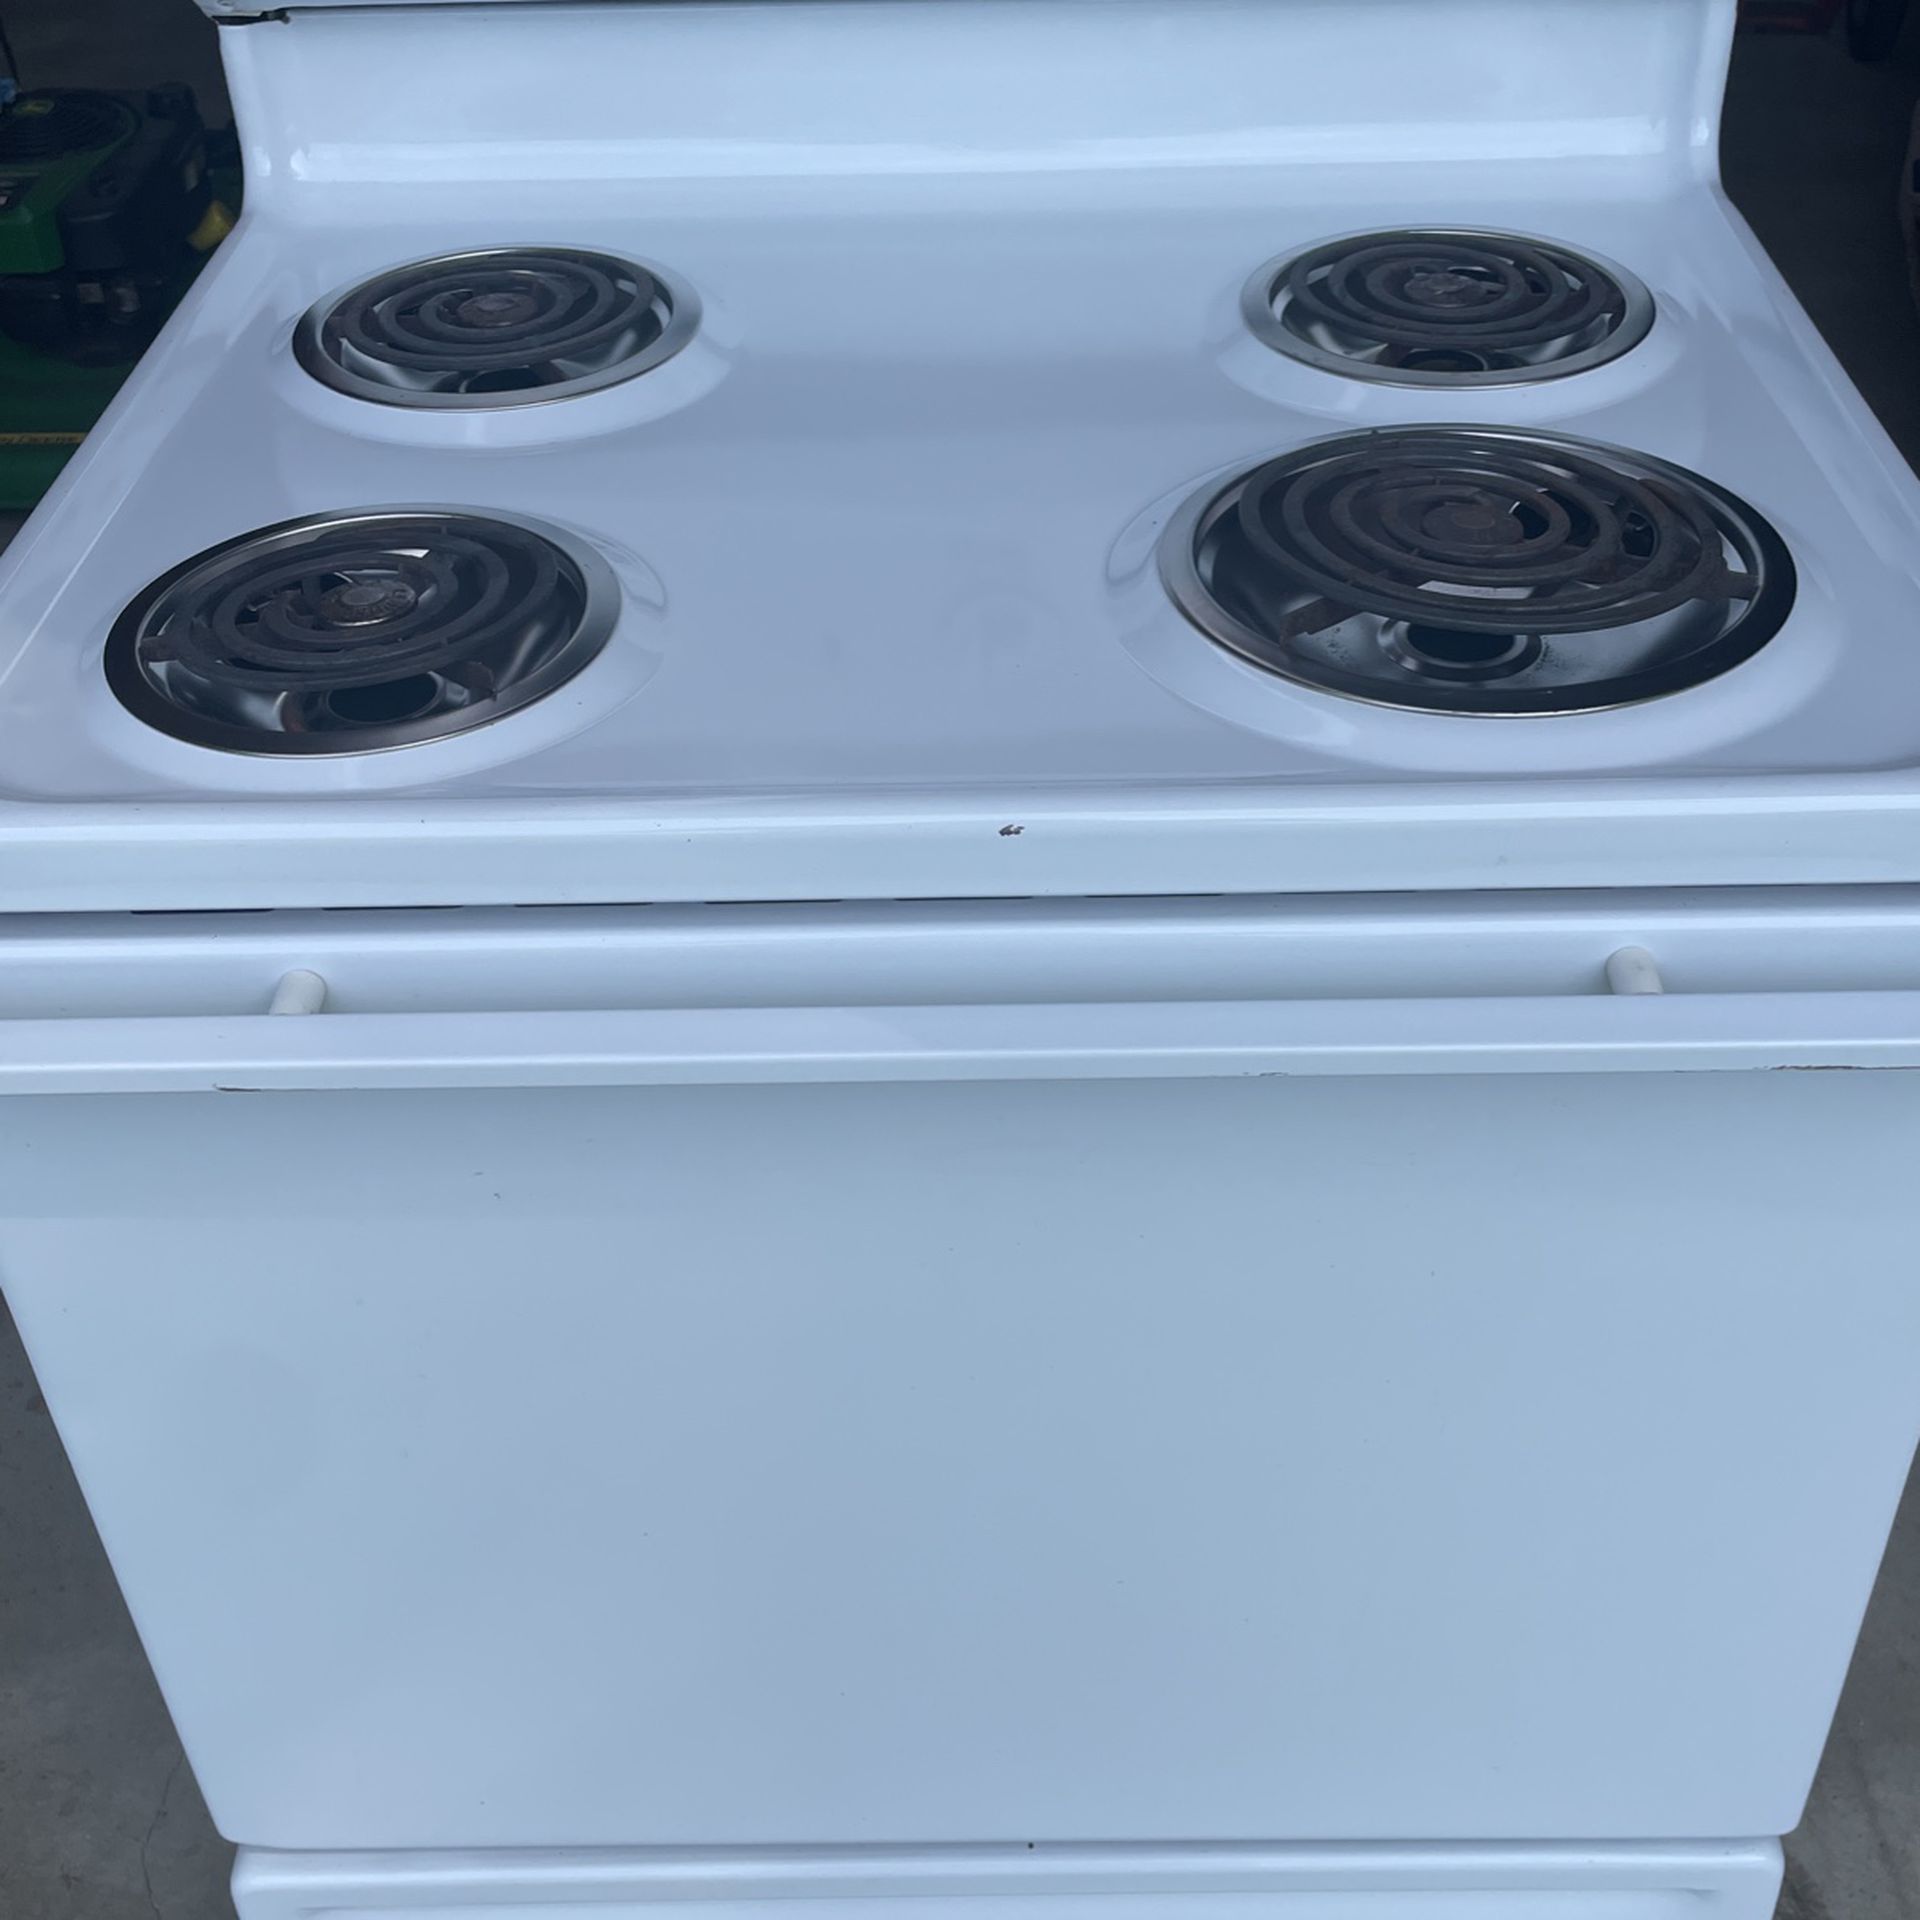 Hotpoint Electric Stove